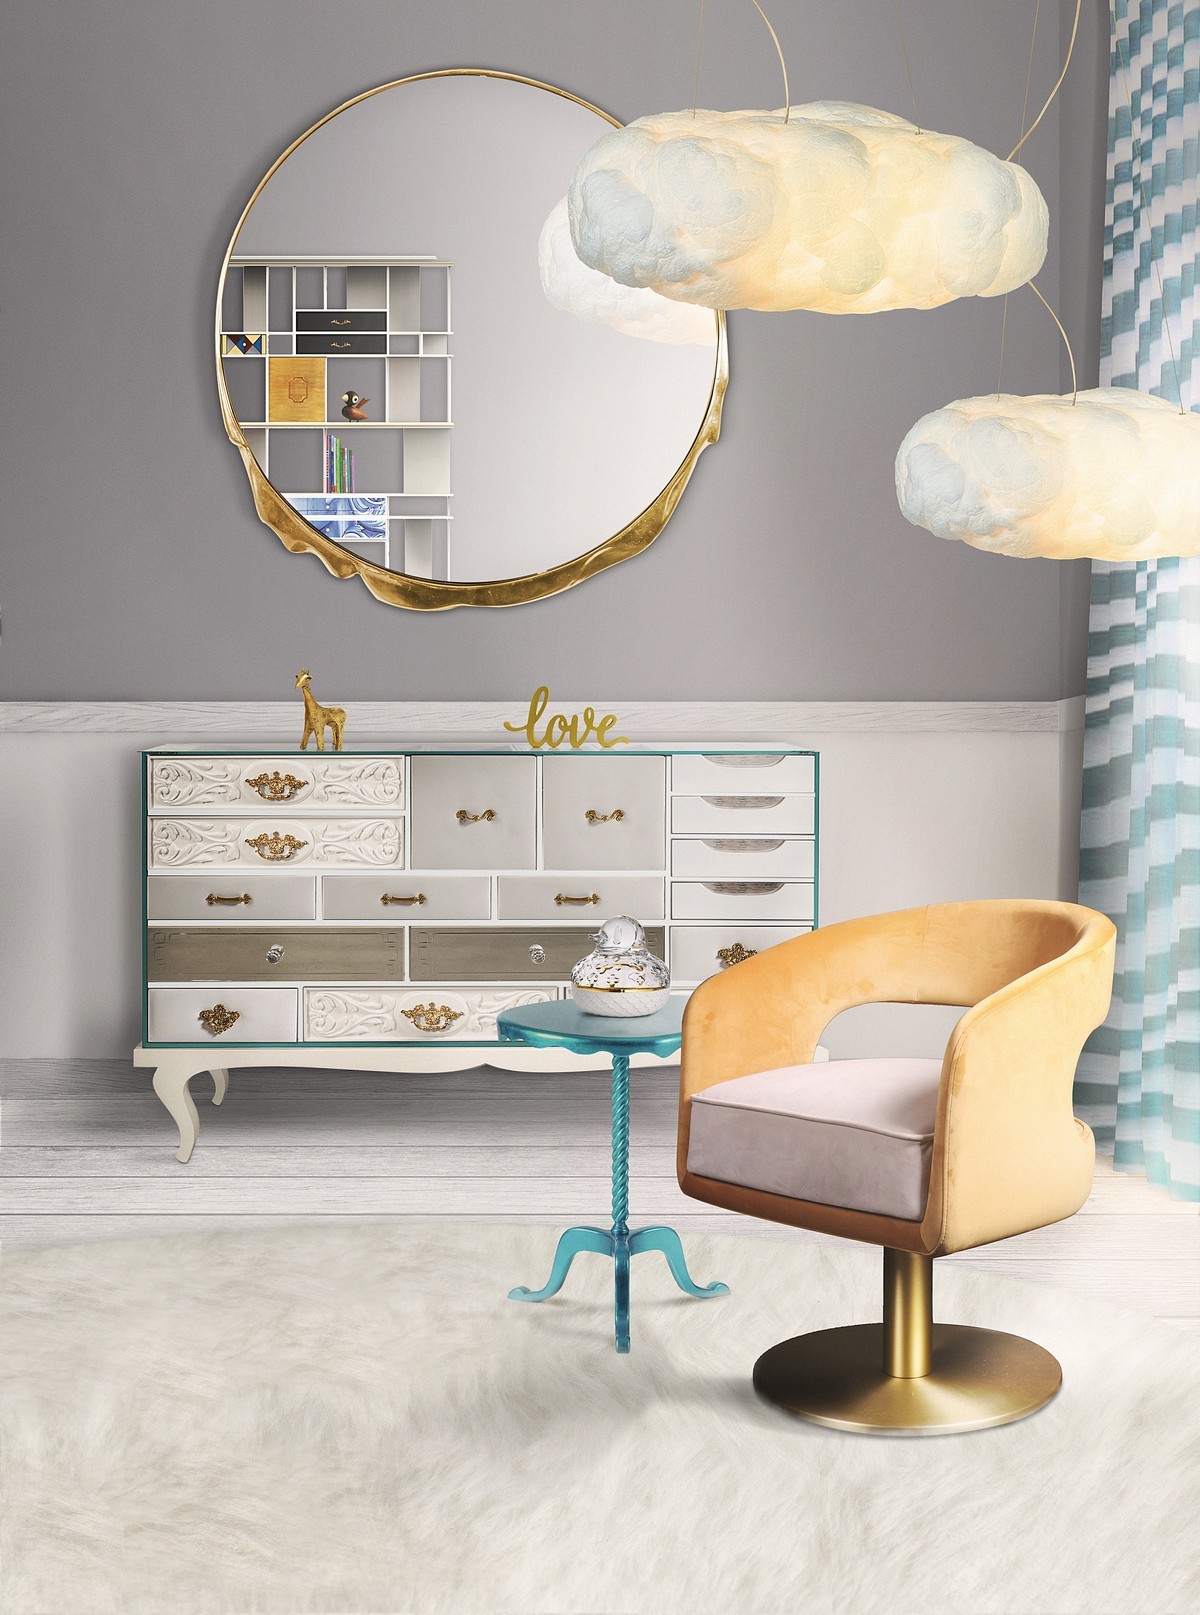 Modern Mirrors To Match Your Living Room Sideboard (Part II)